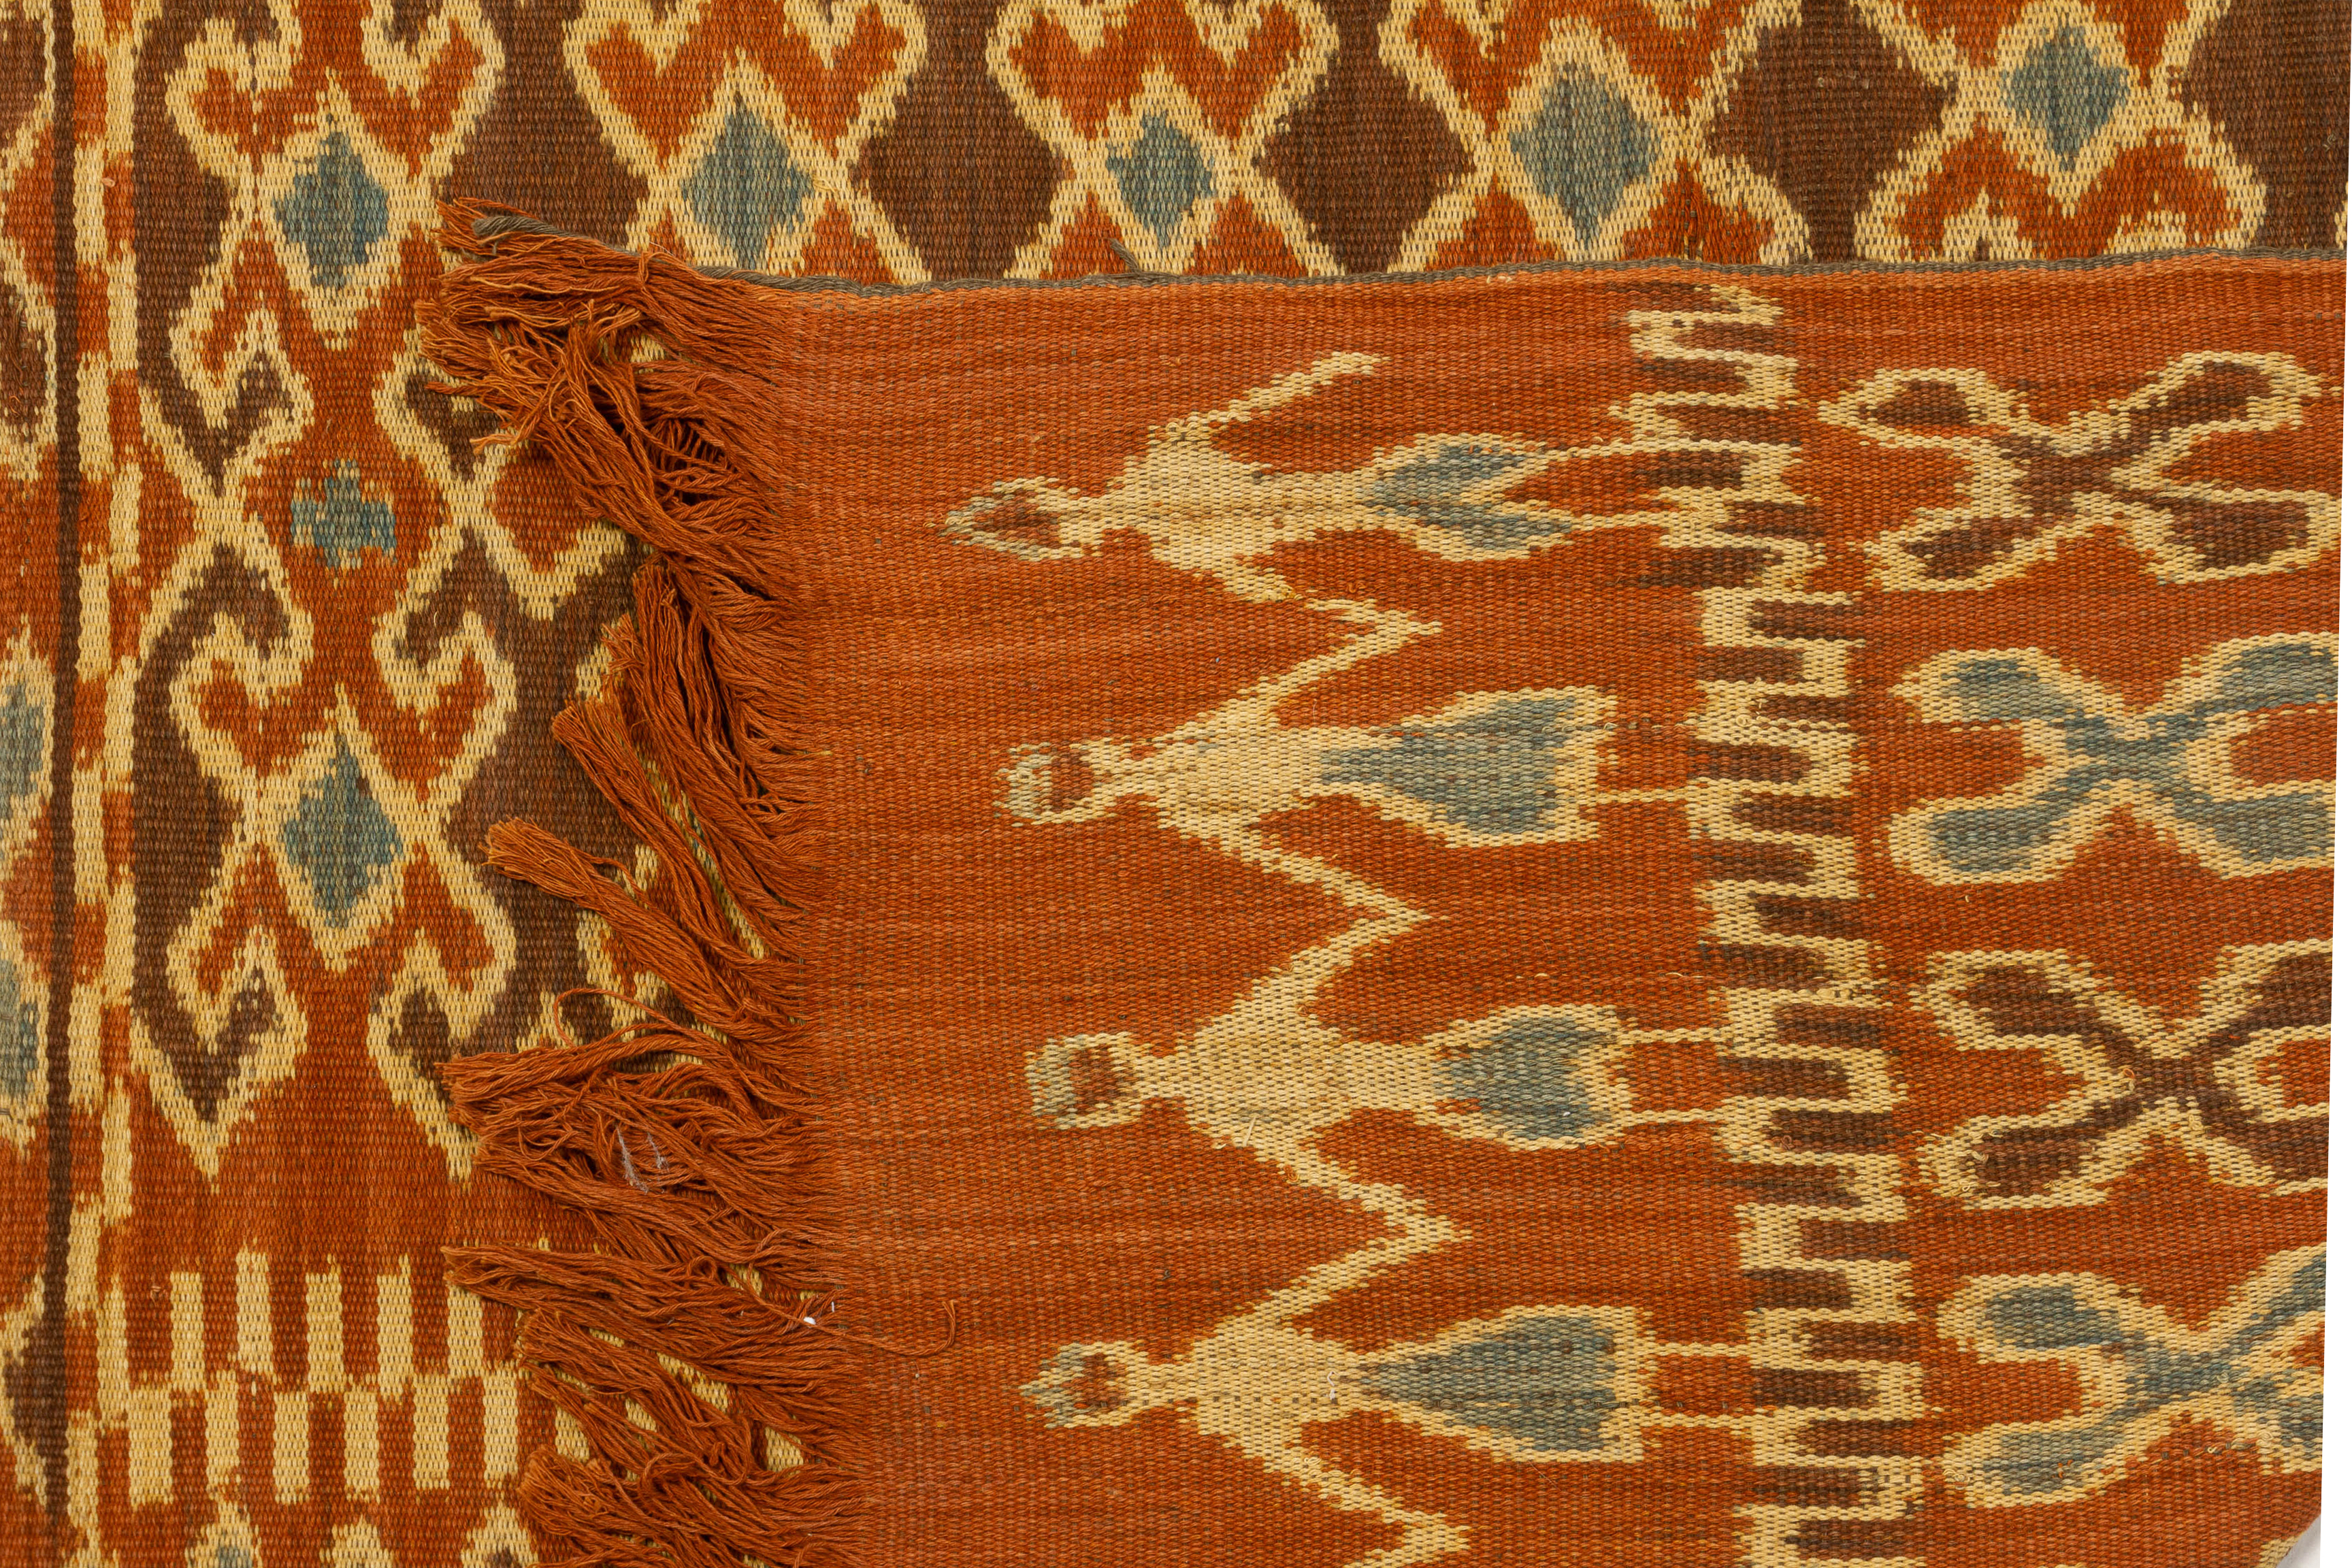 AN INDONESIAN IKAT TEXTILE - Image 2 of 2